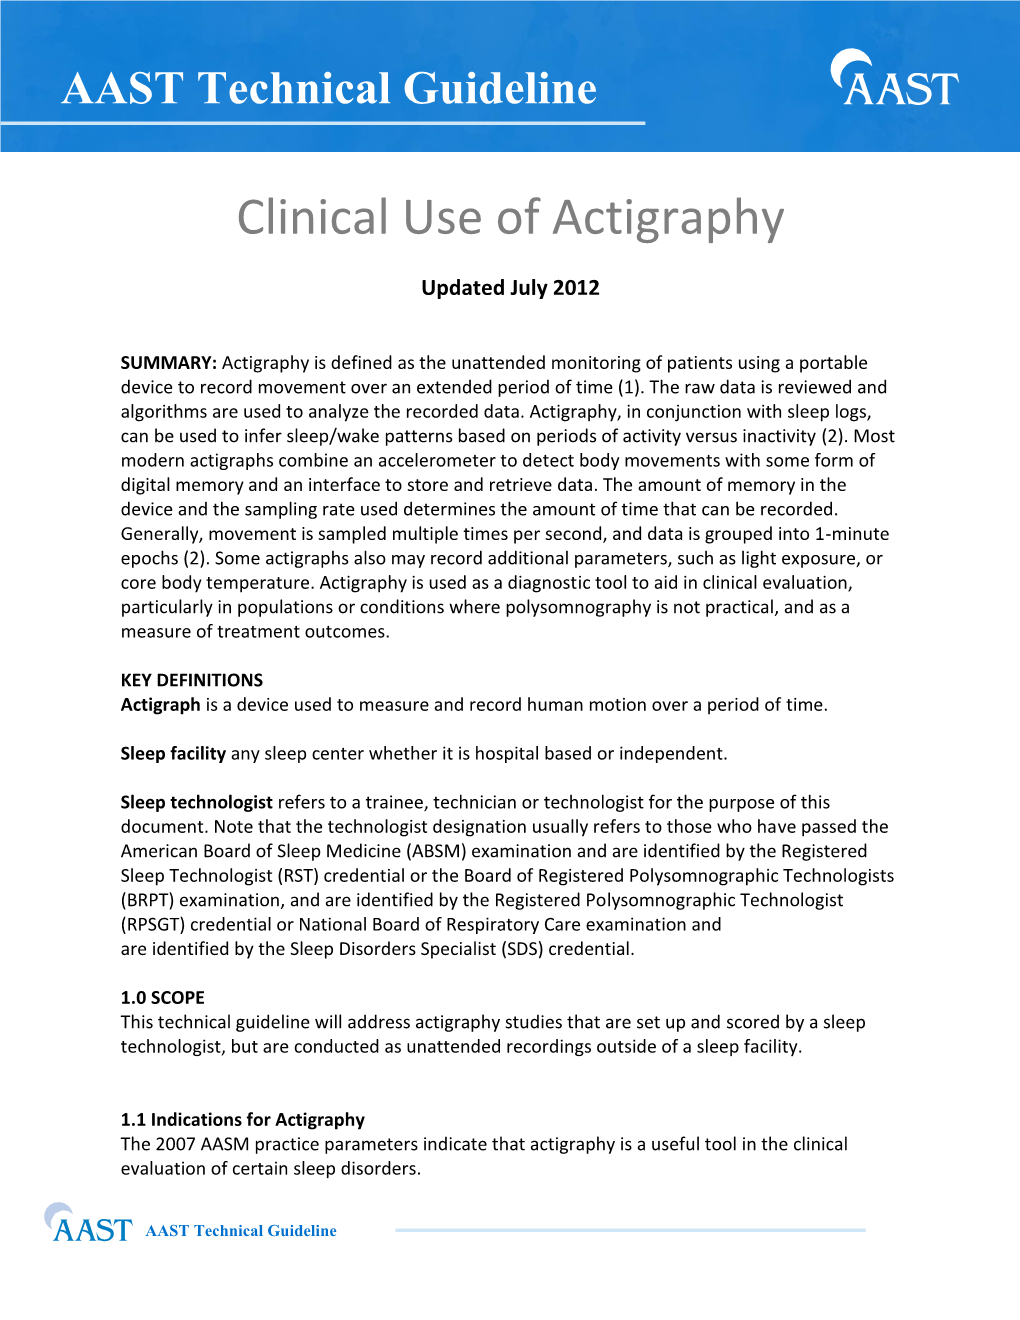 Clinical Use of Actigraphy